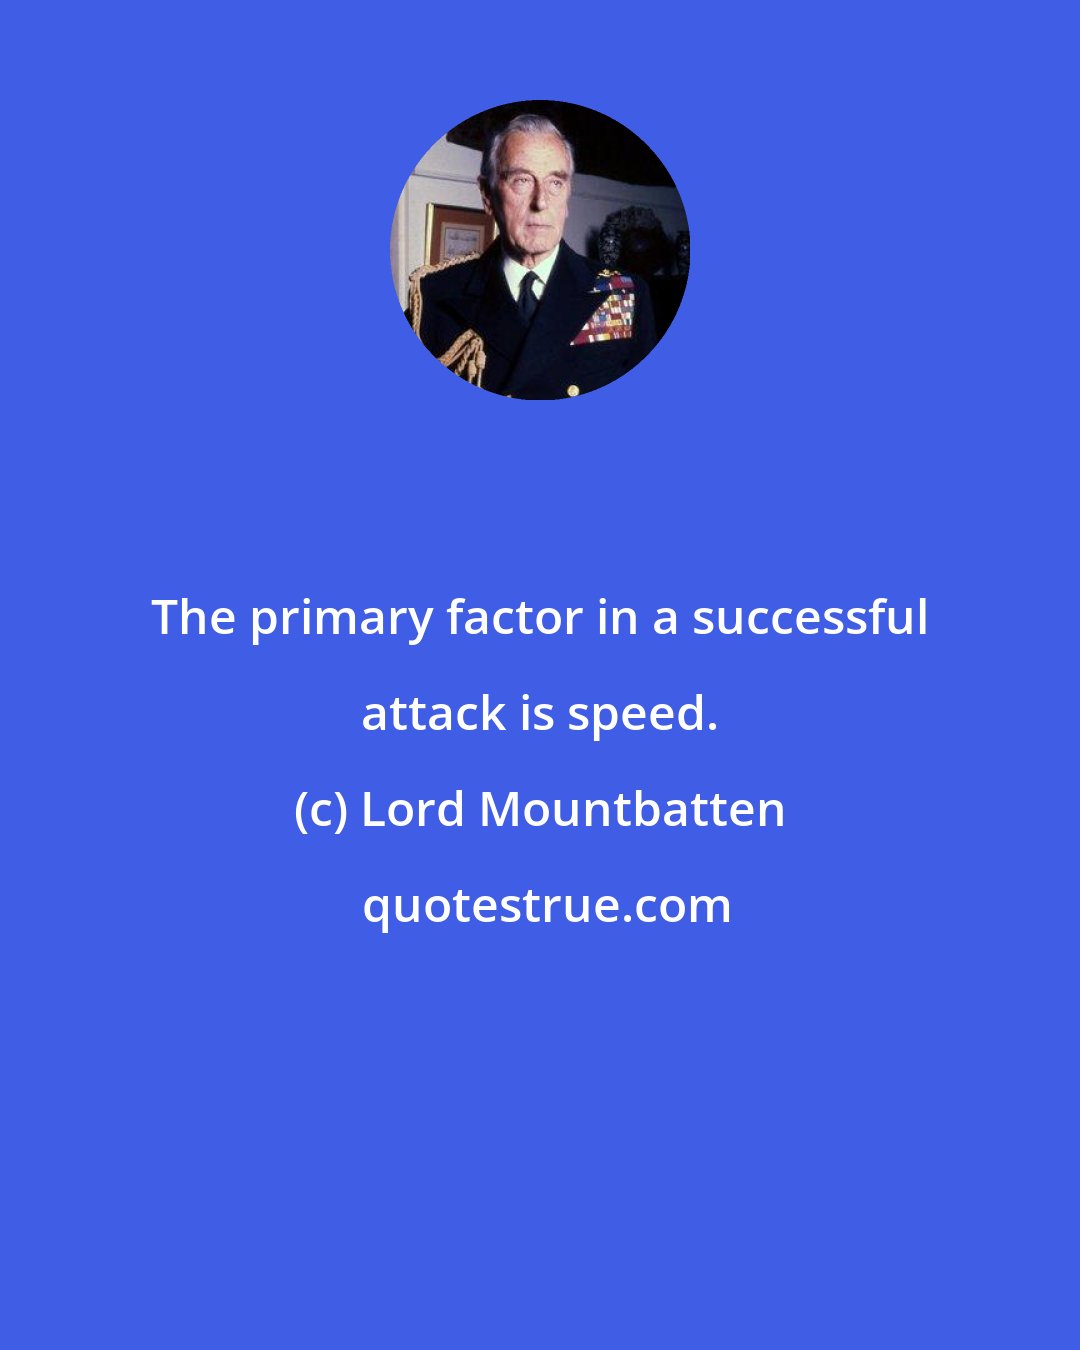 Lord Mountbatten: The primary factor in a successful attack is speed.